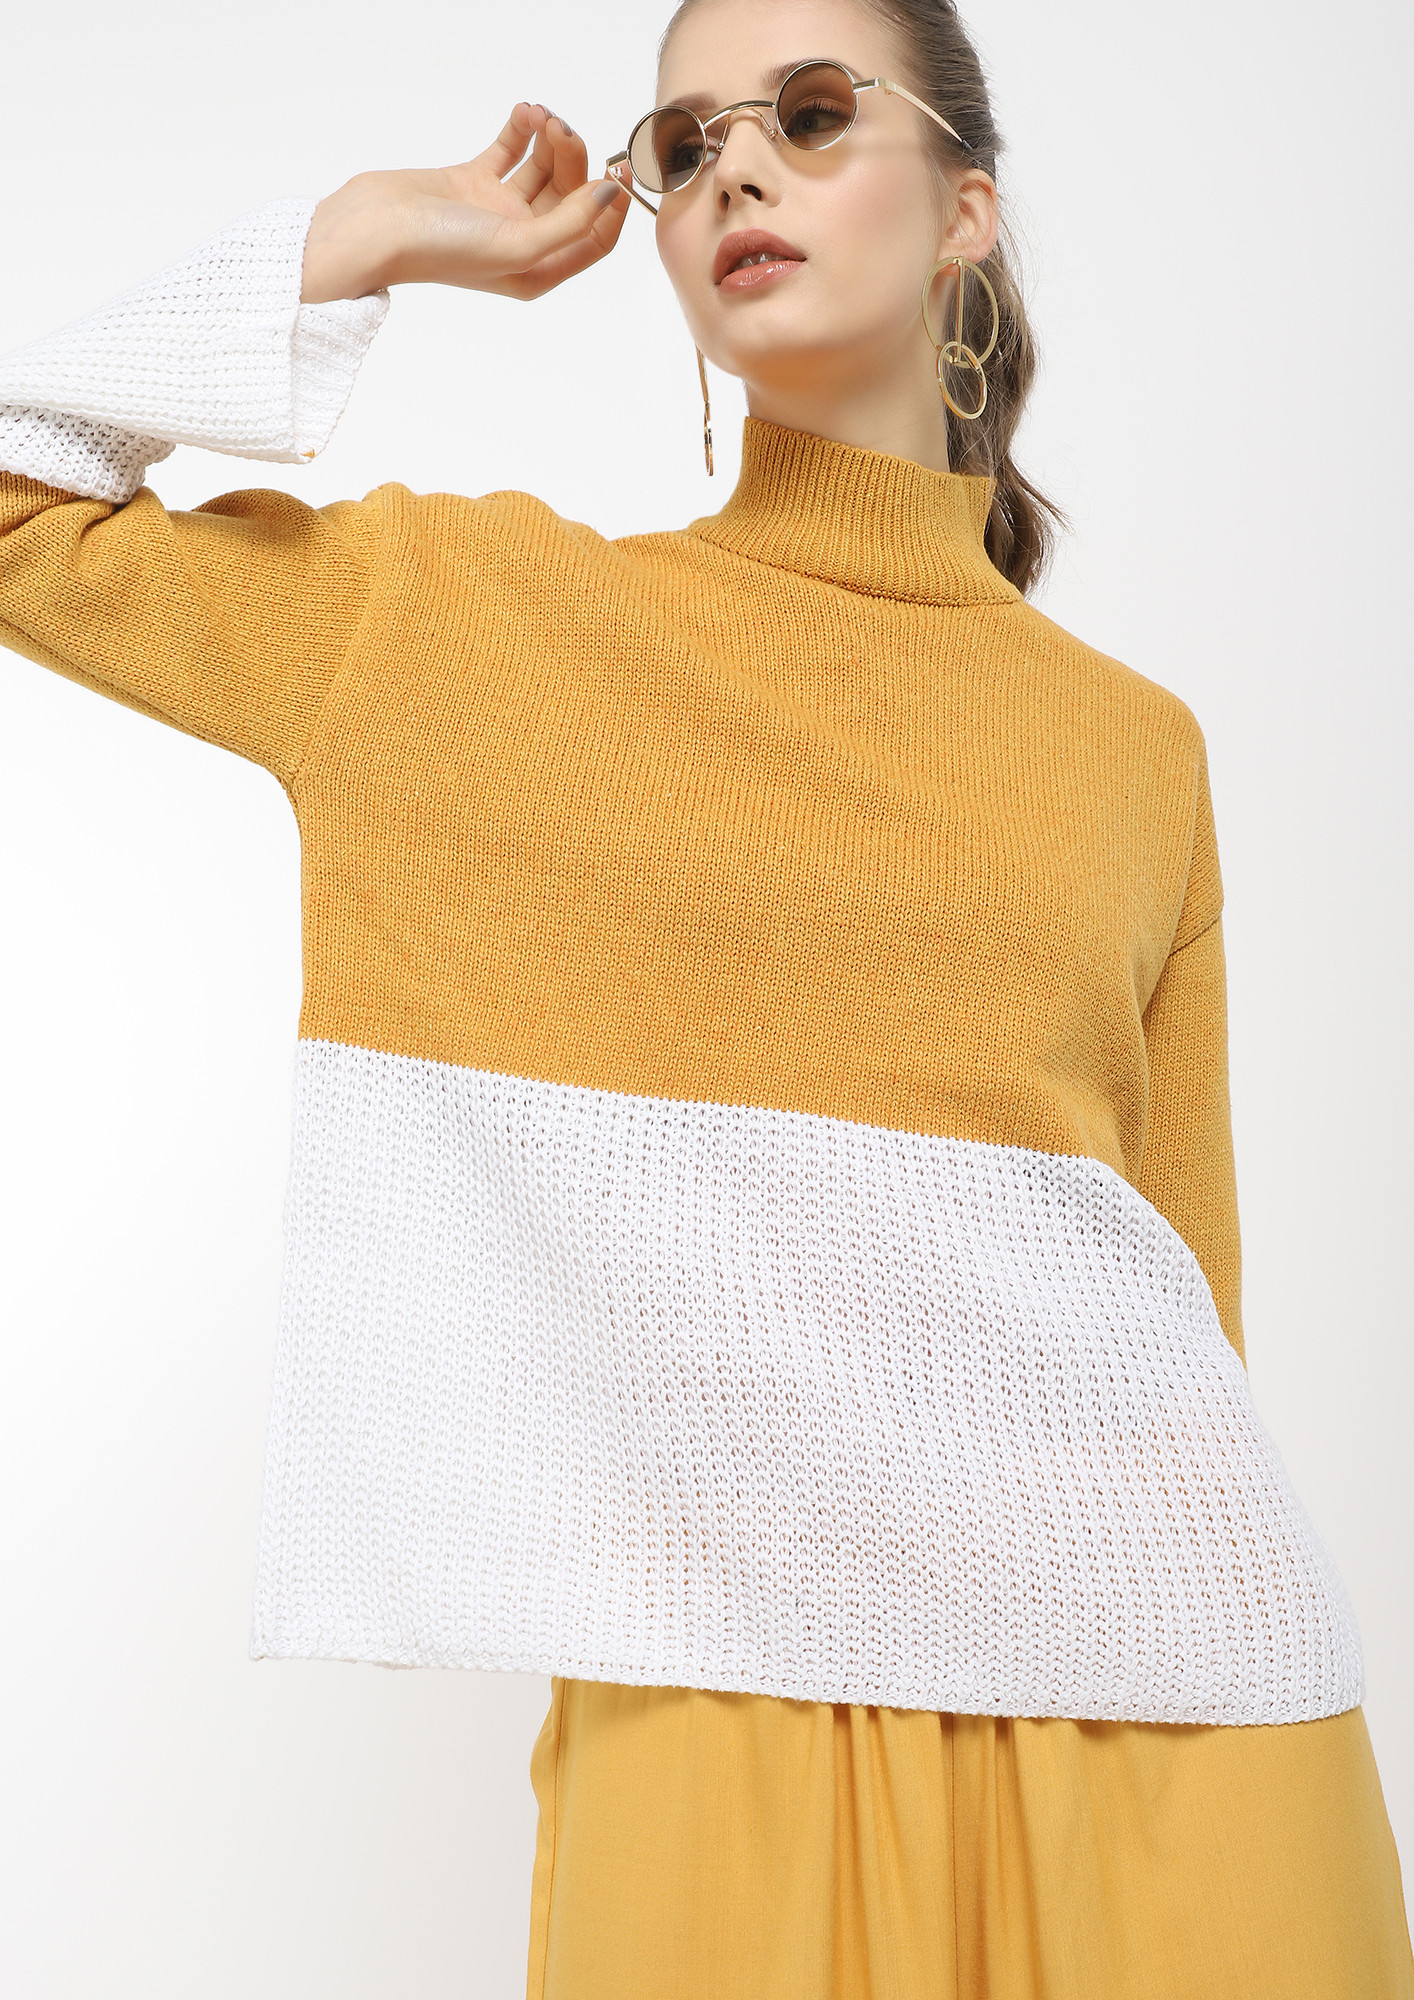 FALL RIGHT IN KNIT YELLOW JUMPER